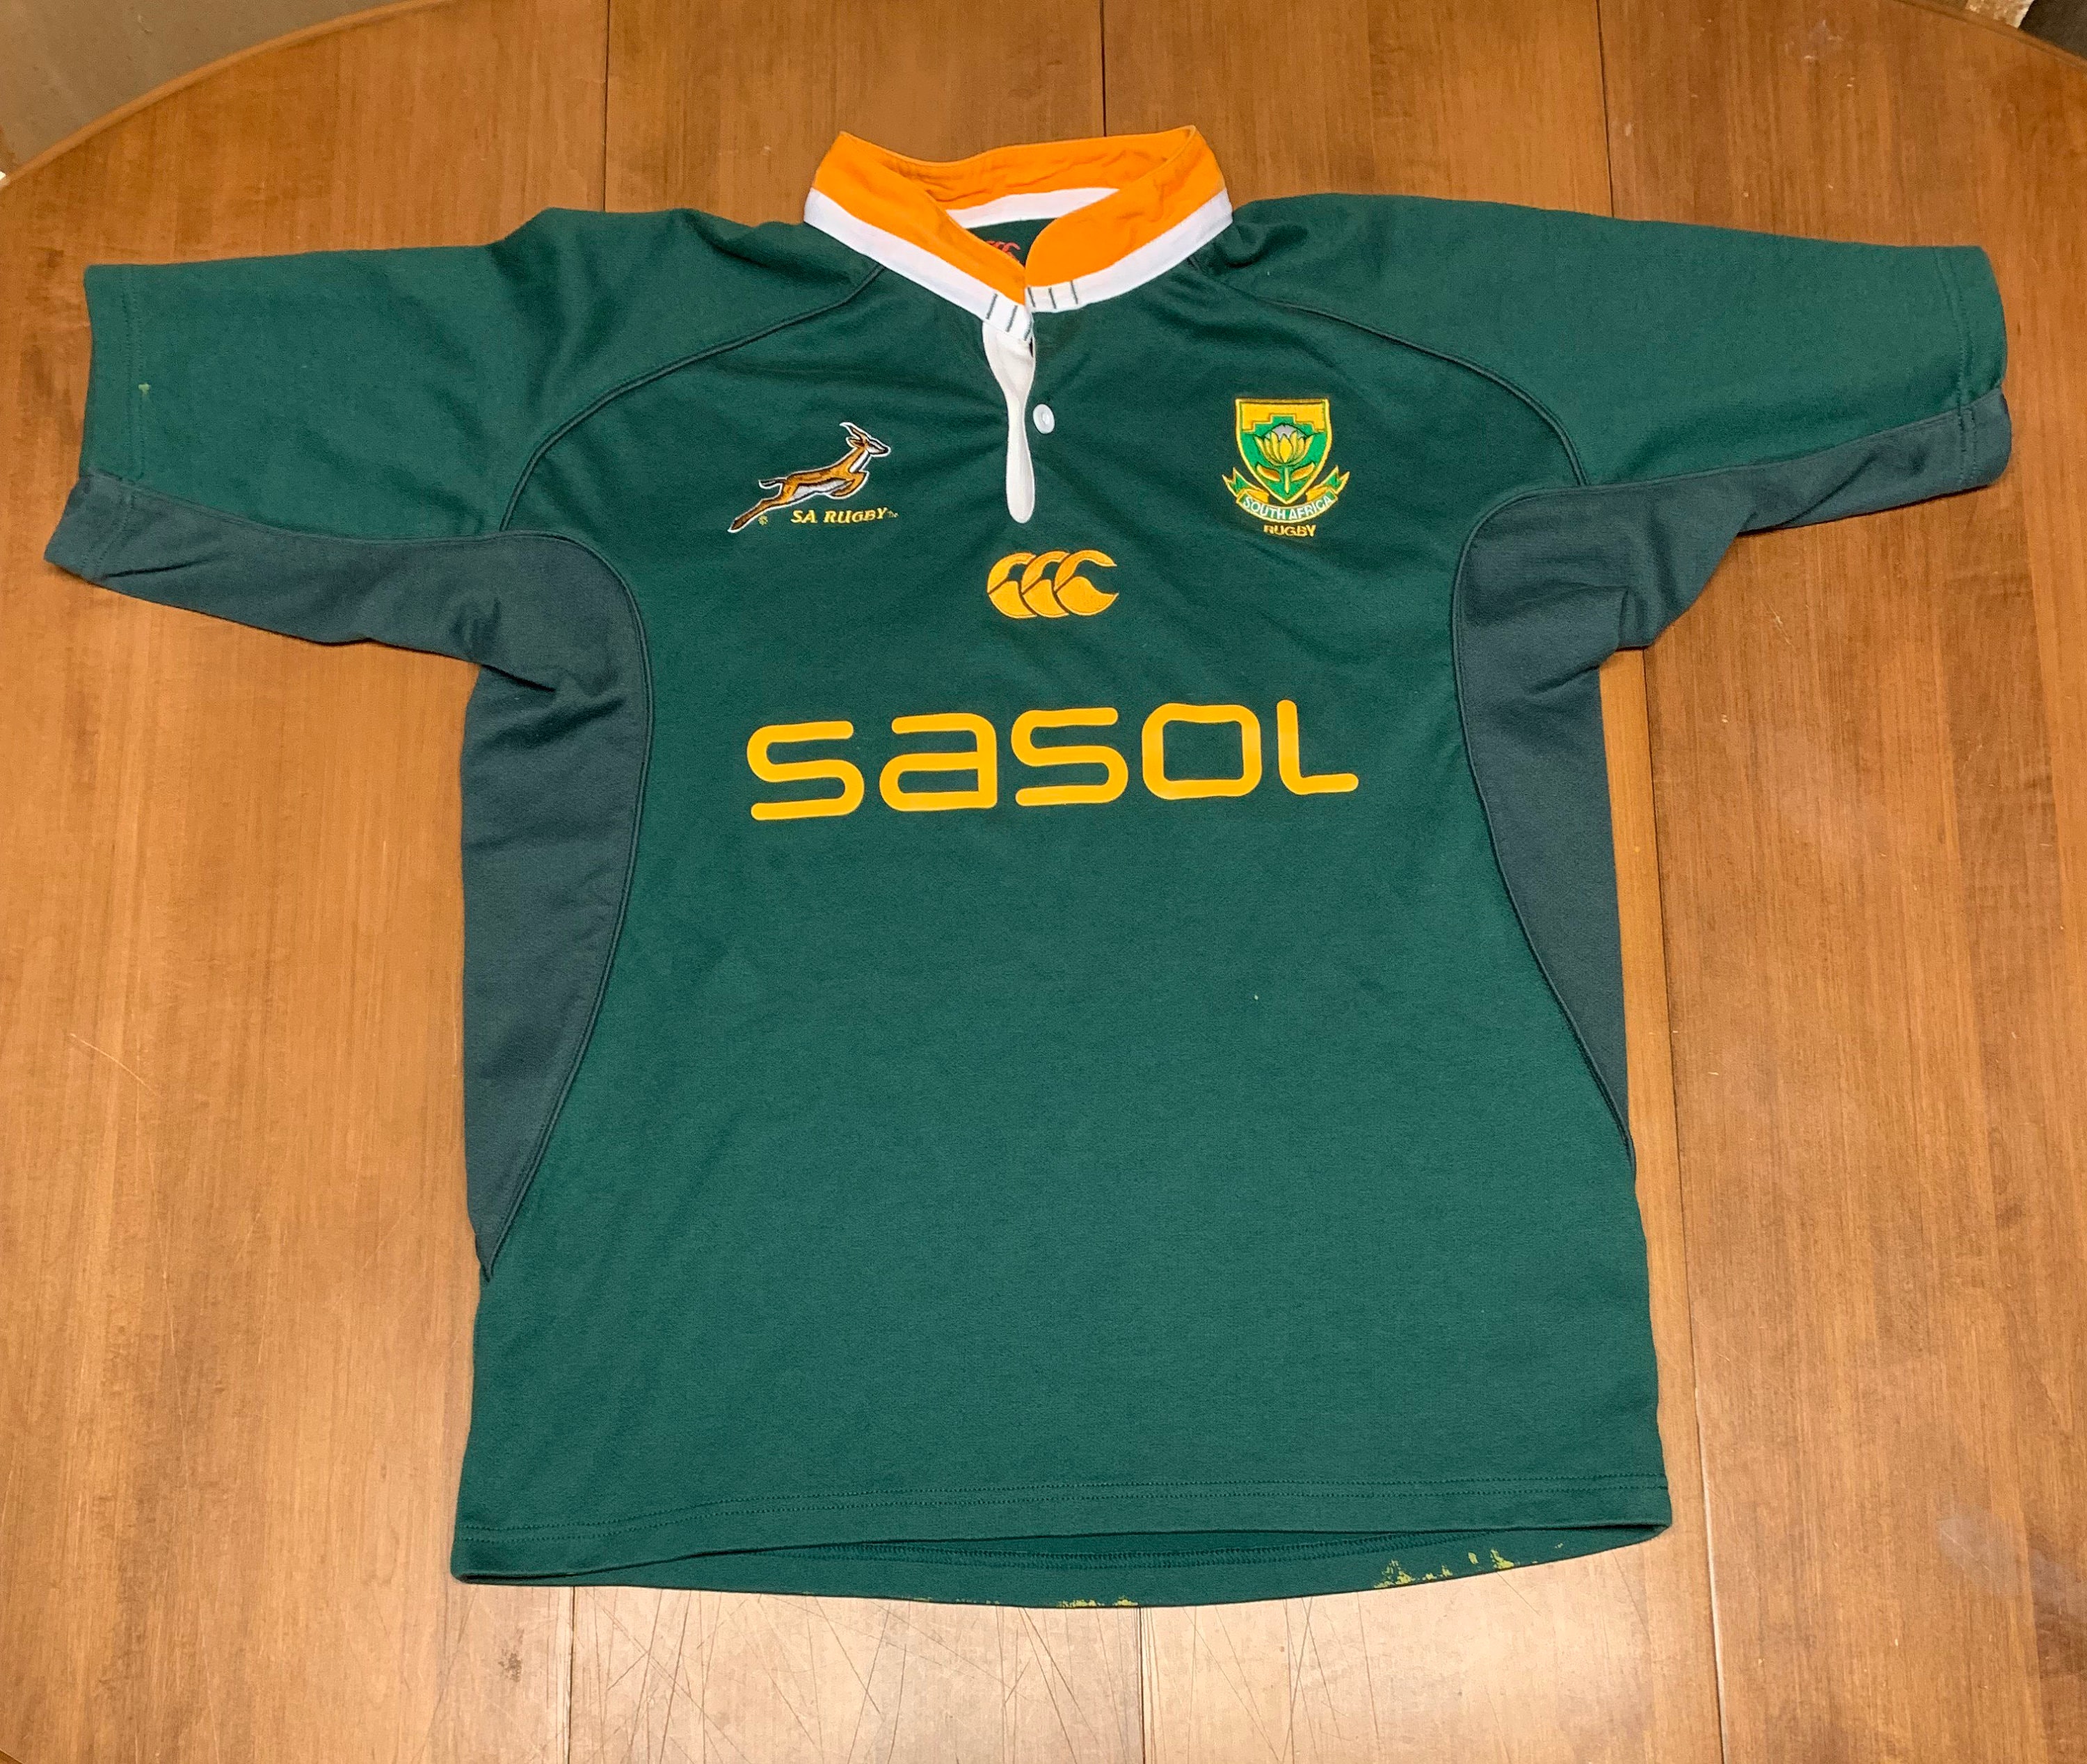 South Africa SA Rugby Team Springboks Jersey Shirt Size Adult